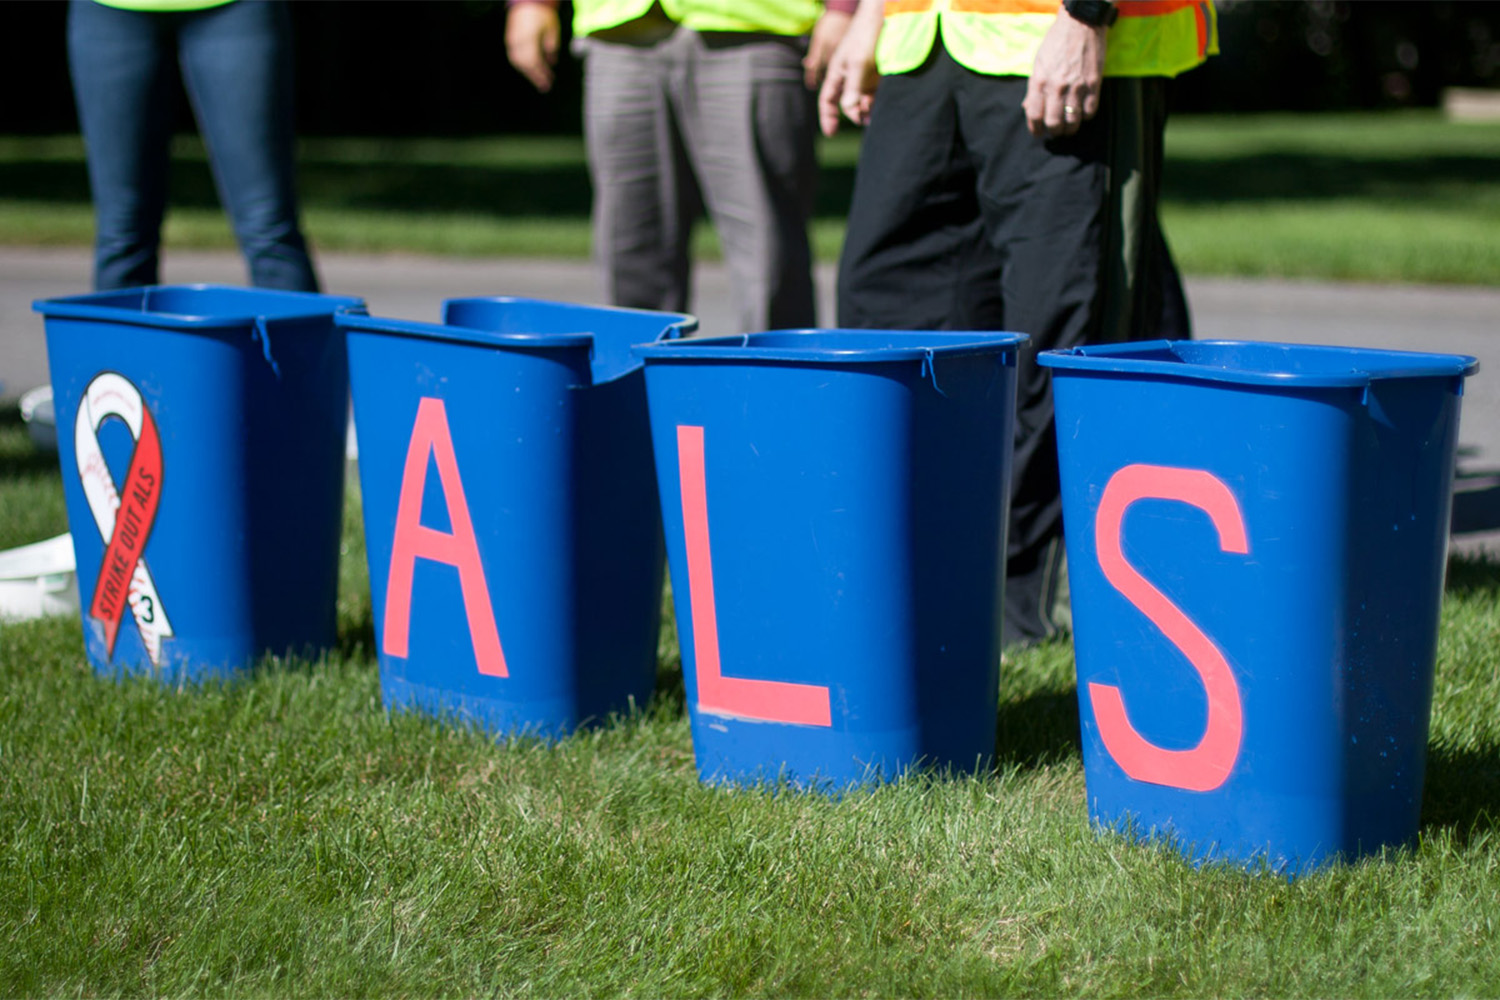 A row of 4 blu8e plastic buckets, with the letters "A, L, S" painted on them 